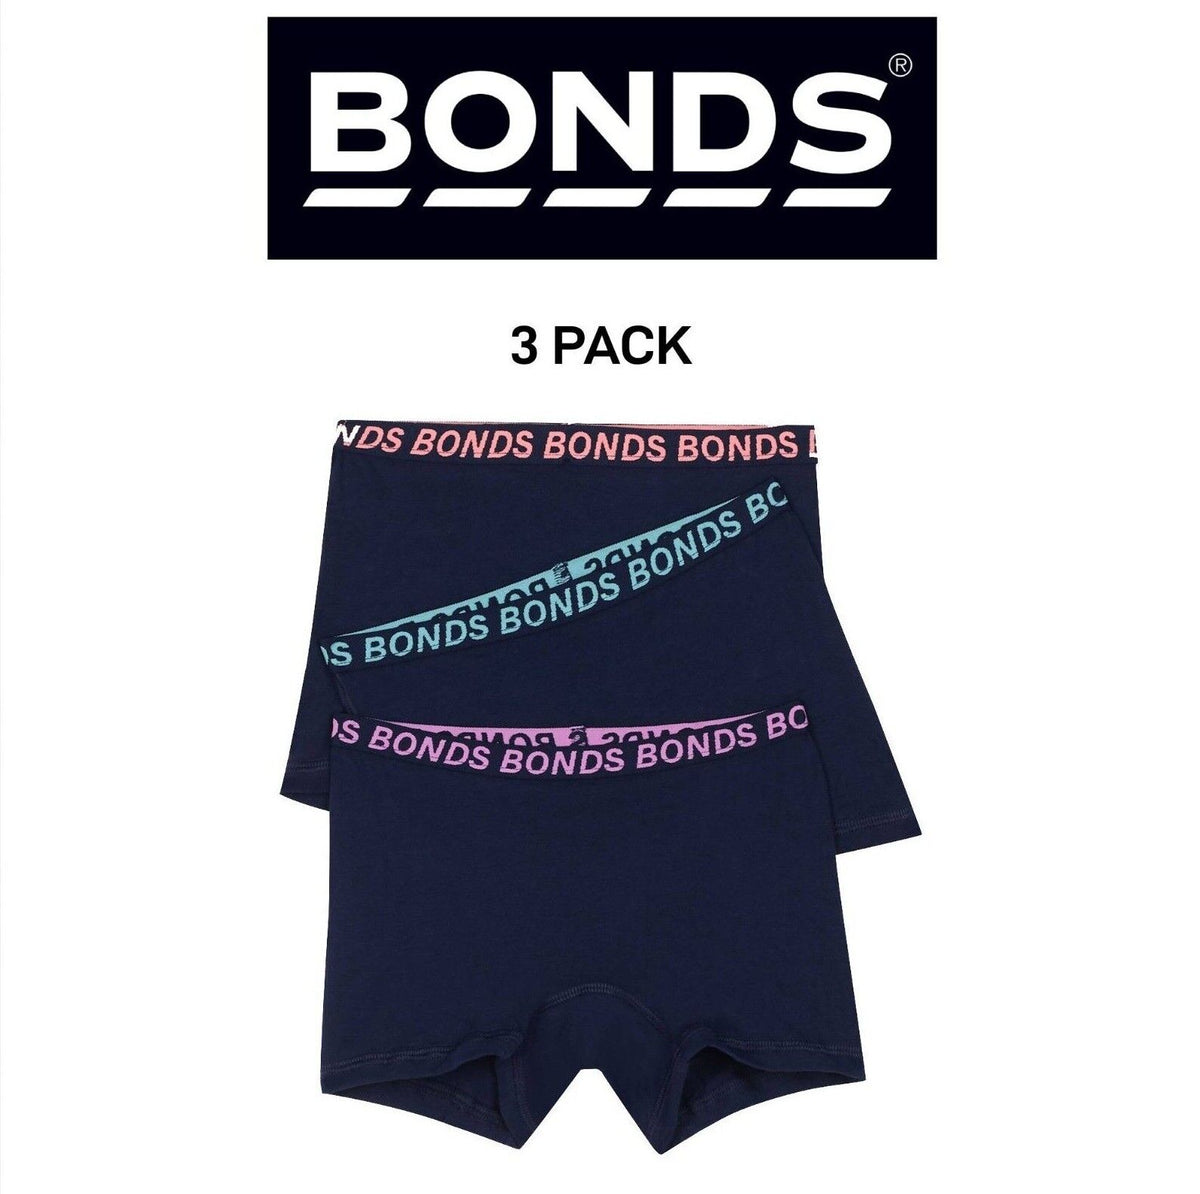 Bonds Girls Sport Shortie Soft Elastic Great Coverage Dry & Comfy 3 Pack UWCT3A